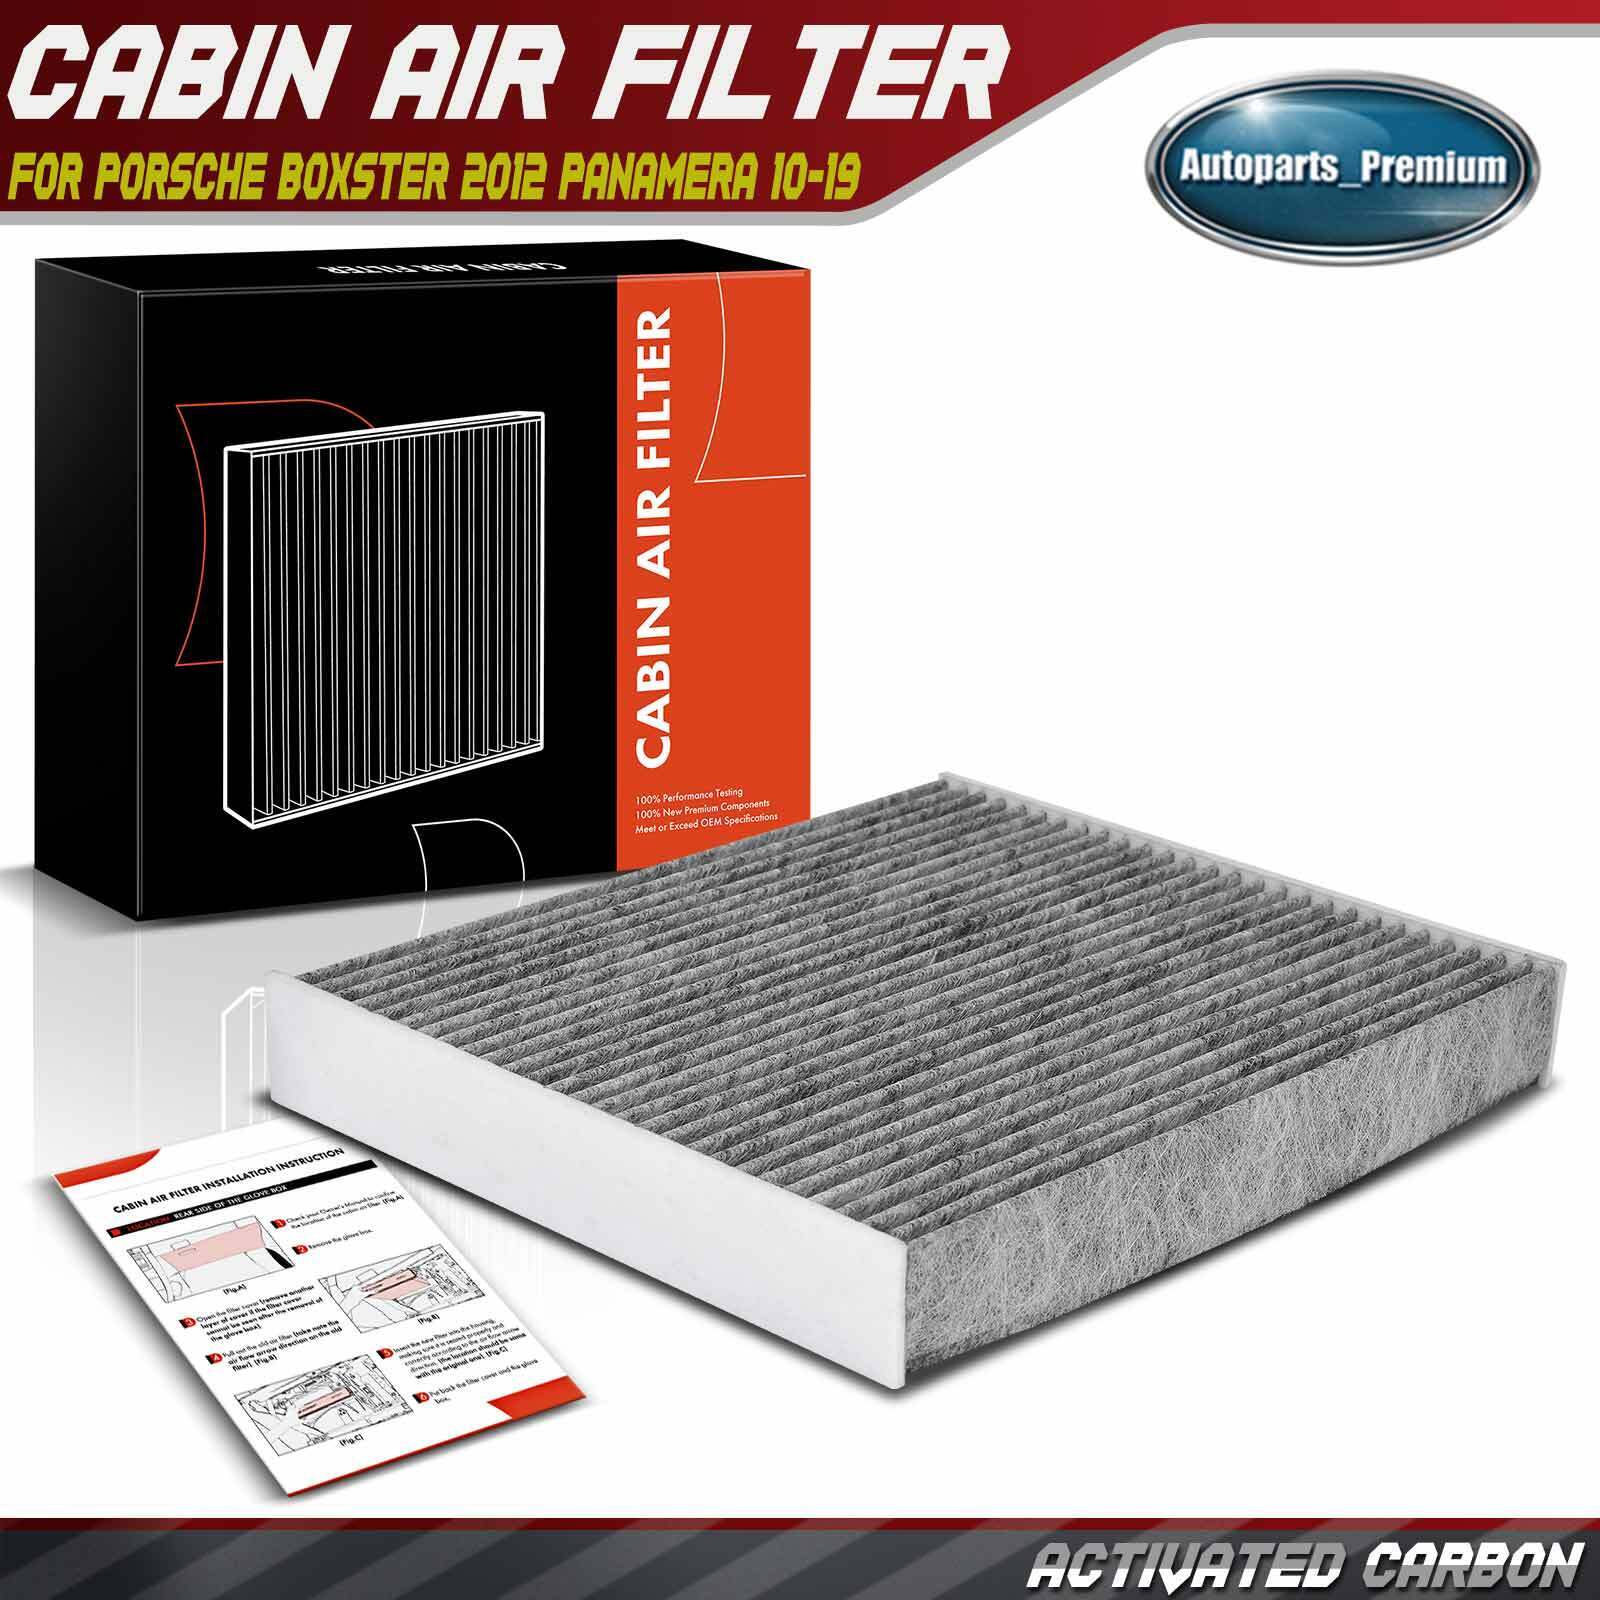 1x Cabin Air Filter with Activated Carbon for Porsche Boxster Panamera 2010-2019